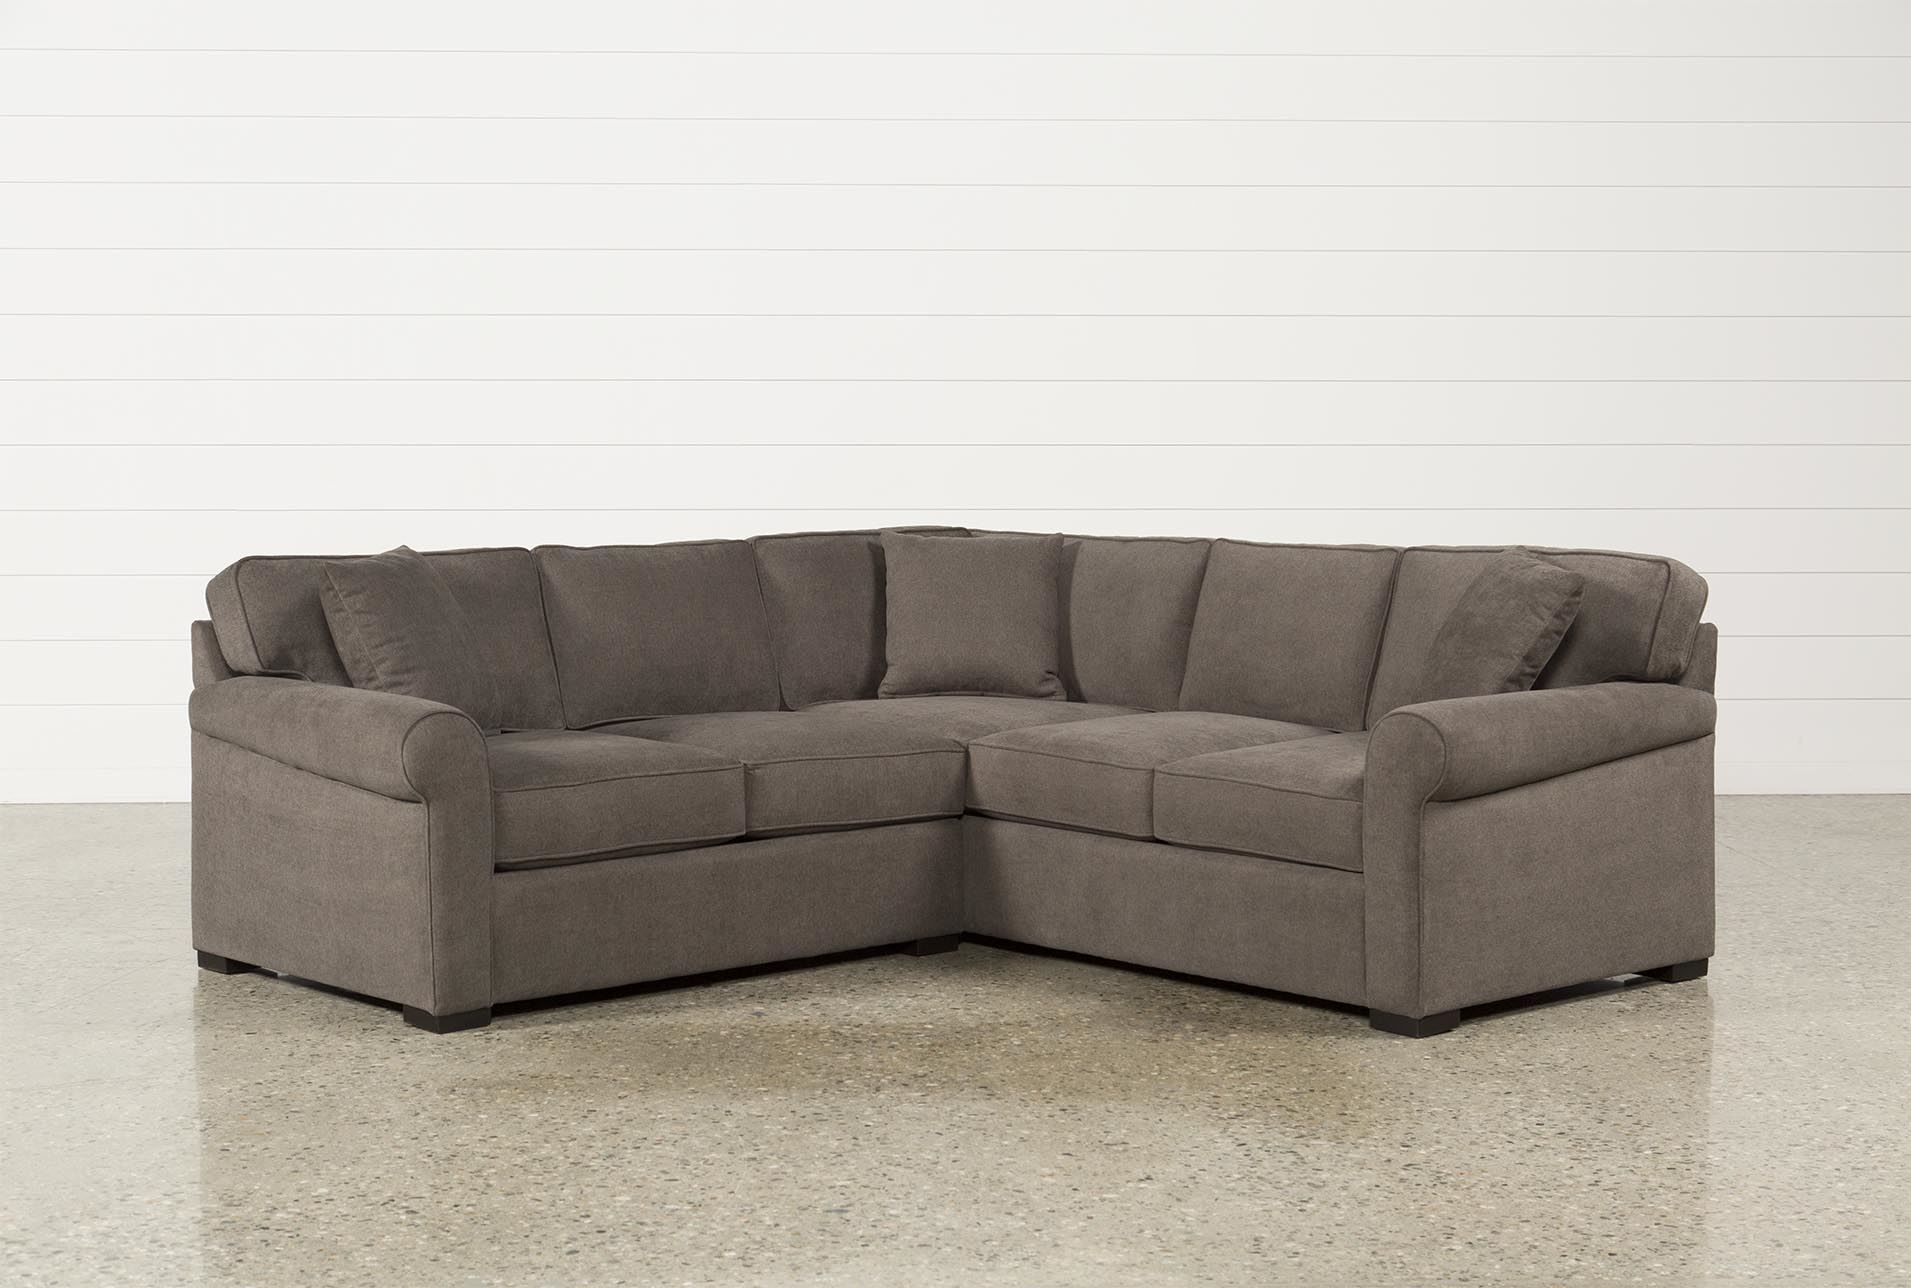 Elm Grande 2 Piece Sectional, Grey, Sofas | Pinterest | Living Throughout Arrowmask 2 Piece Sectionals With Raf Chaise (View 22 of 25)